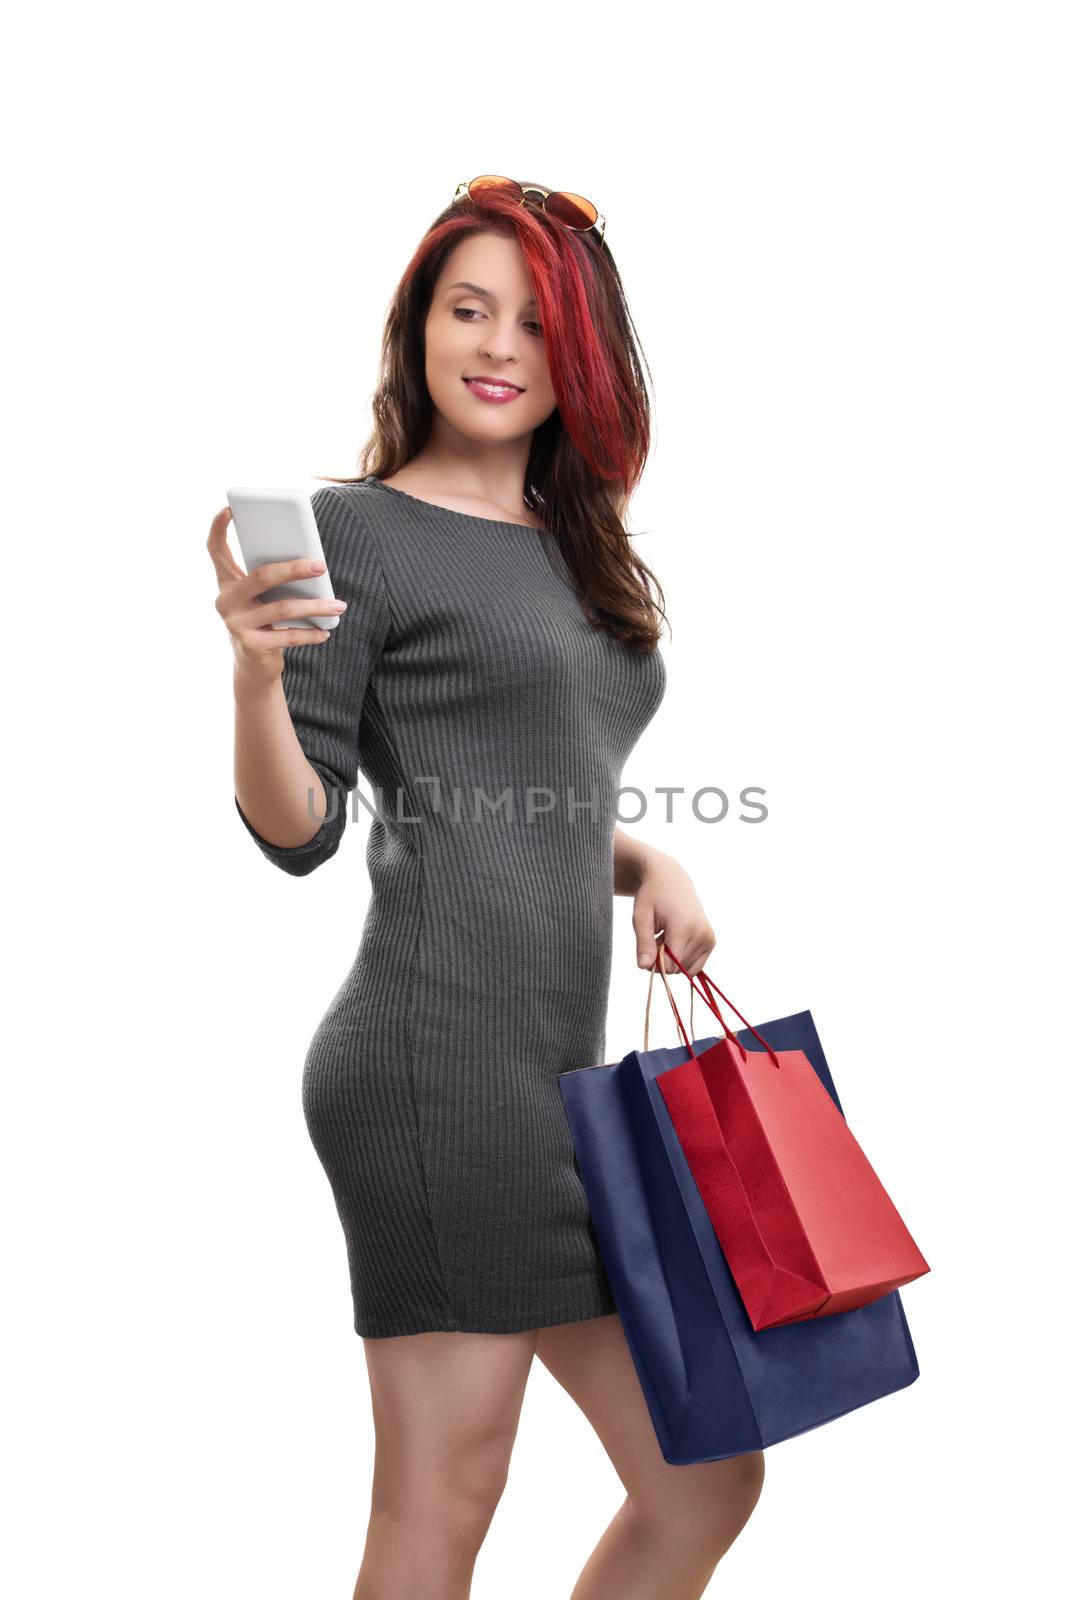 Shopping and social media go together by Mendelex